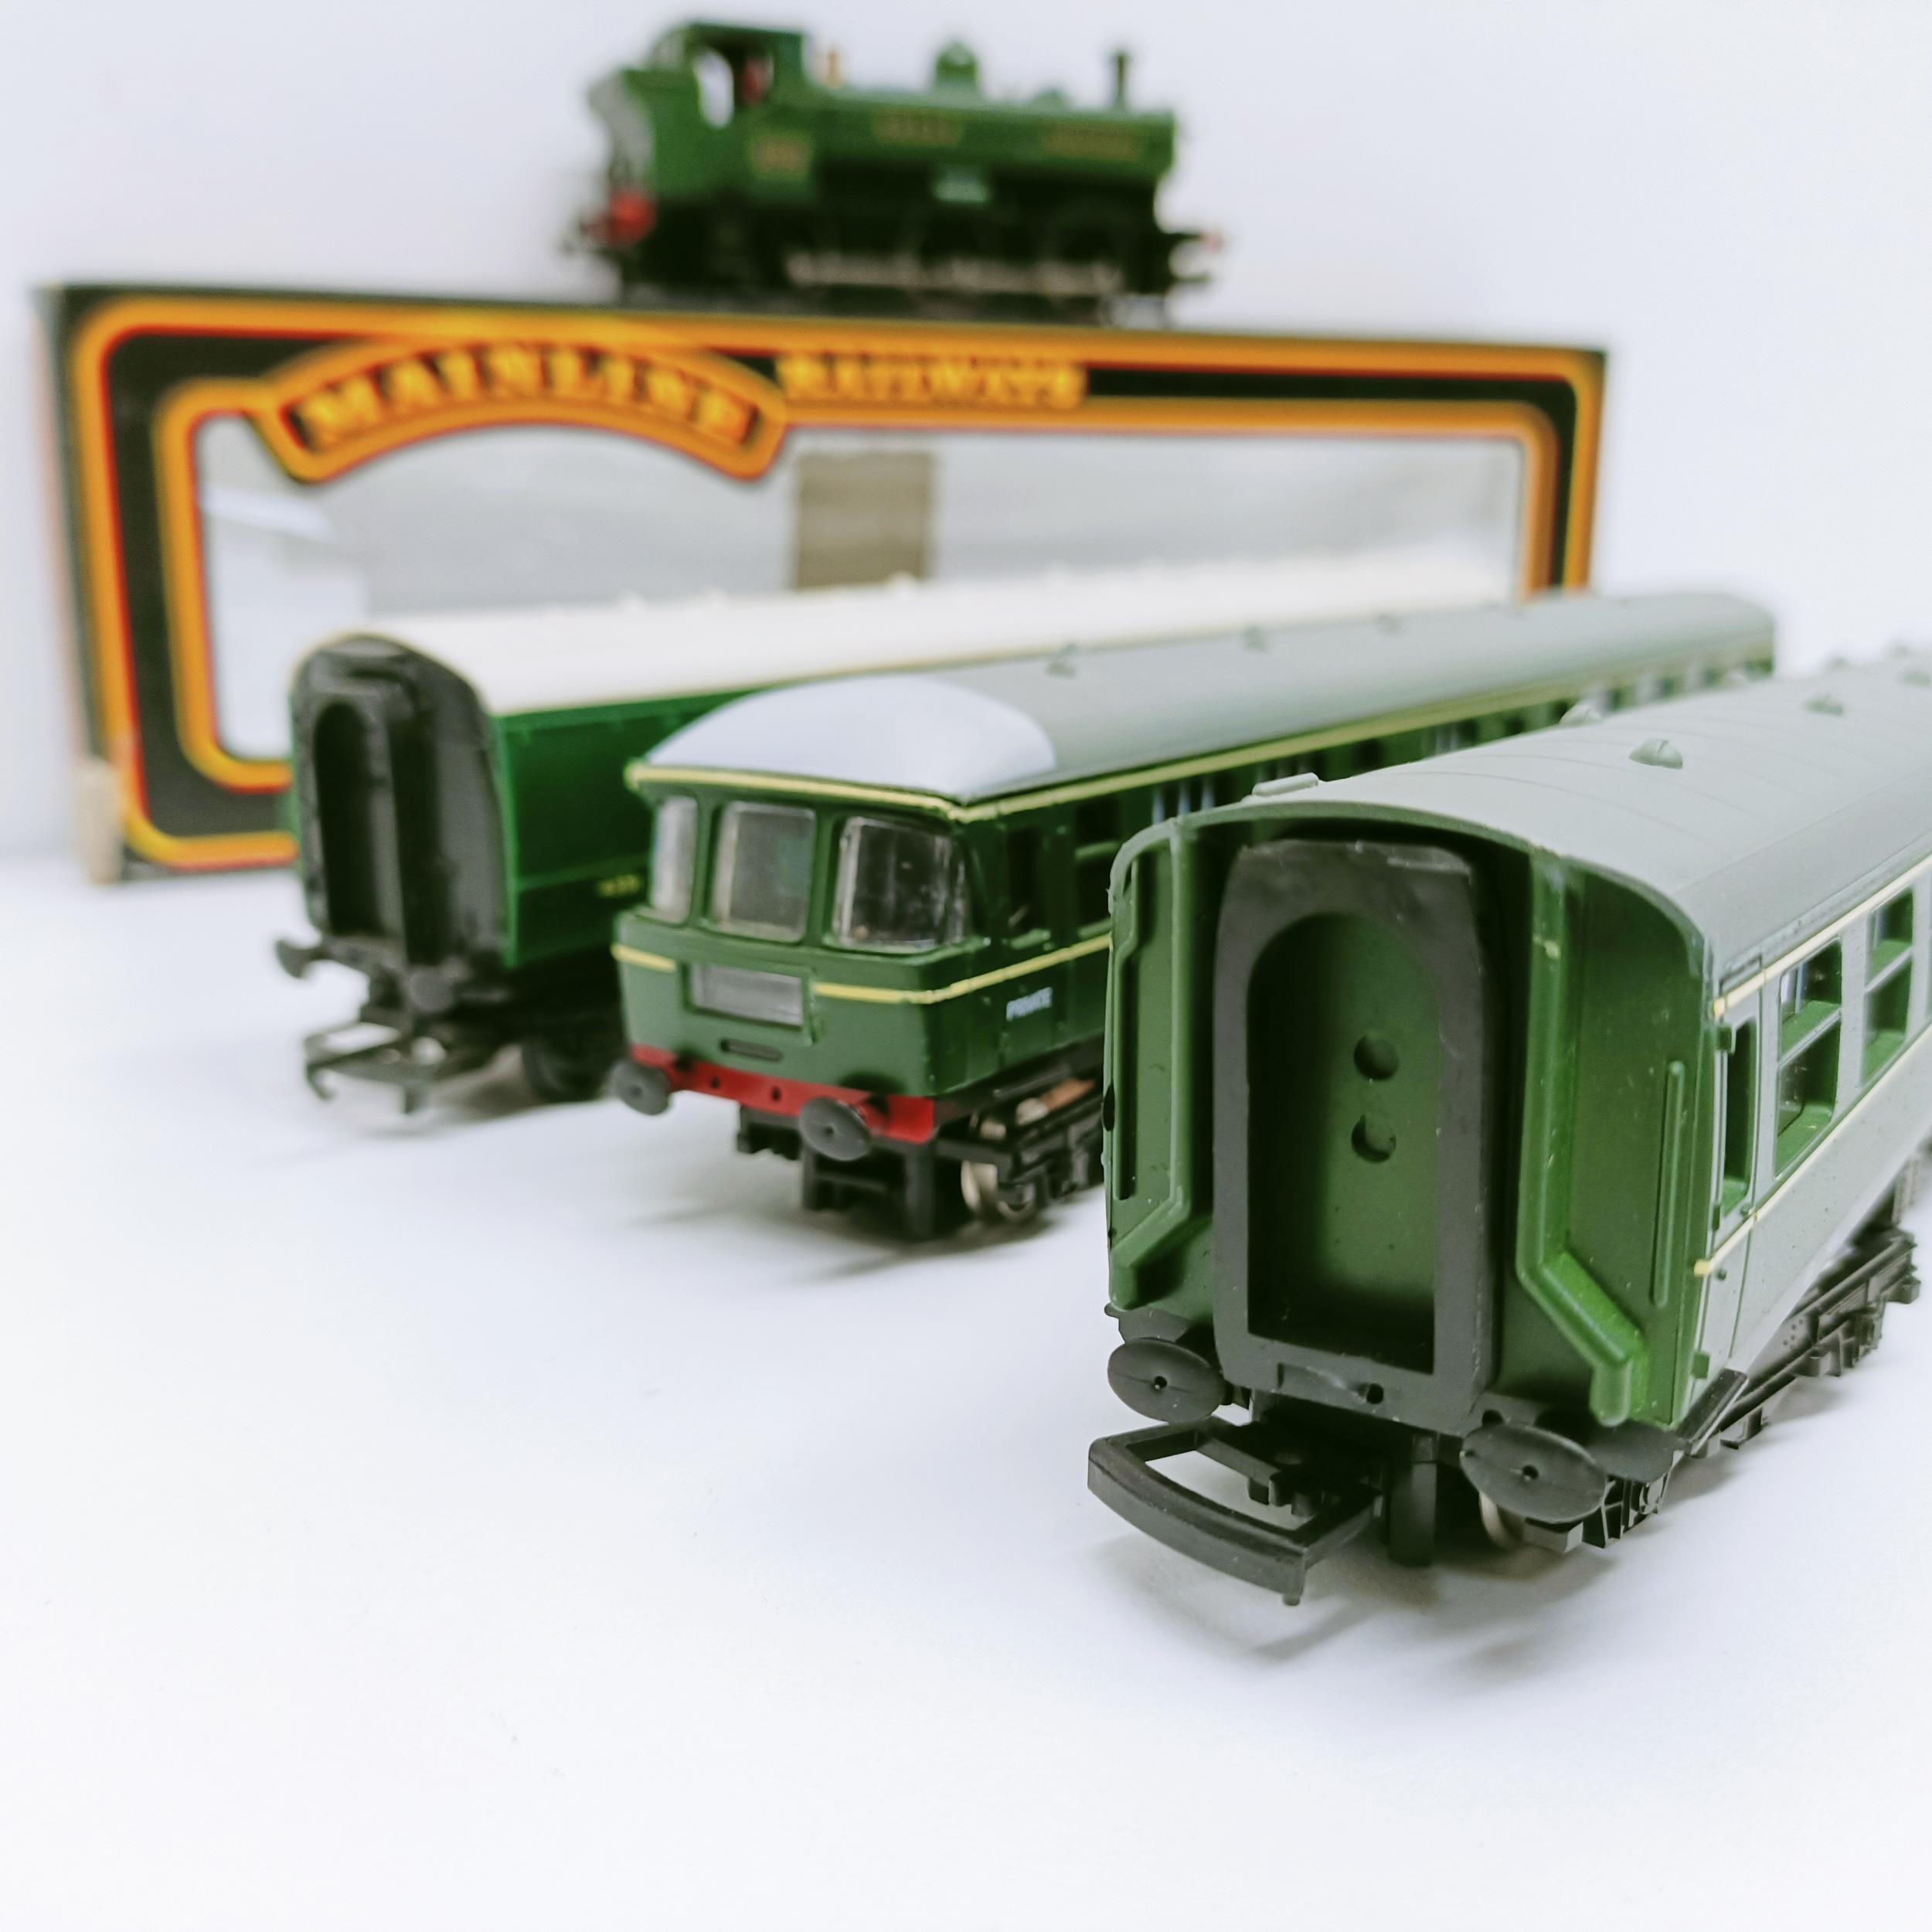 A Mainline Railways OO gauge 0-6-0 locomotive, lacking tender, No 37-058, boxed, a two car train - Image 5 of 10